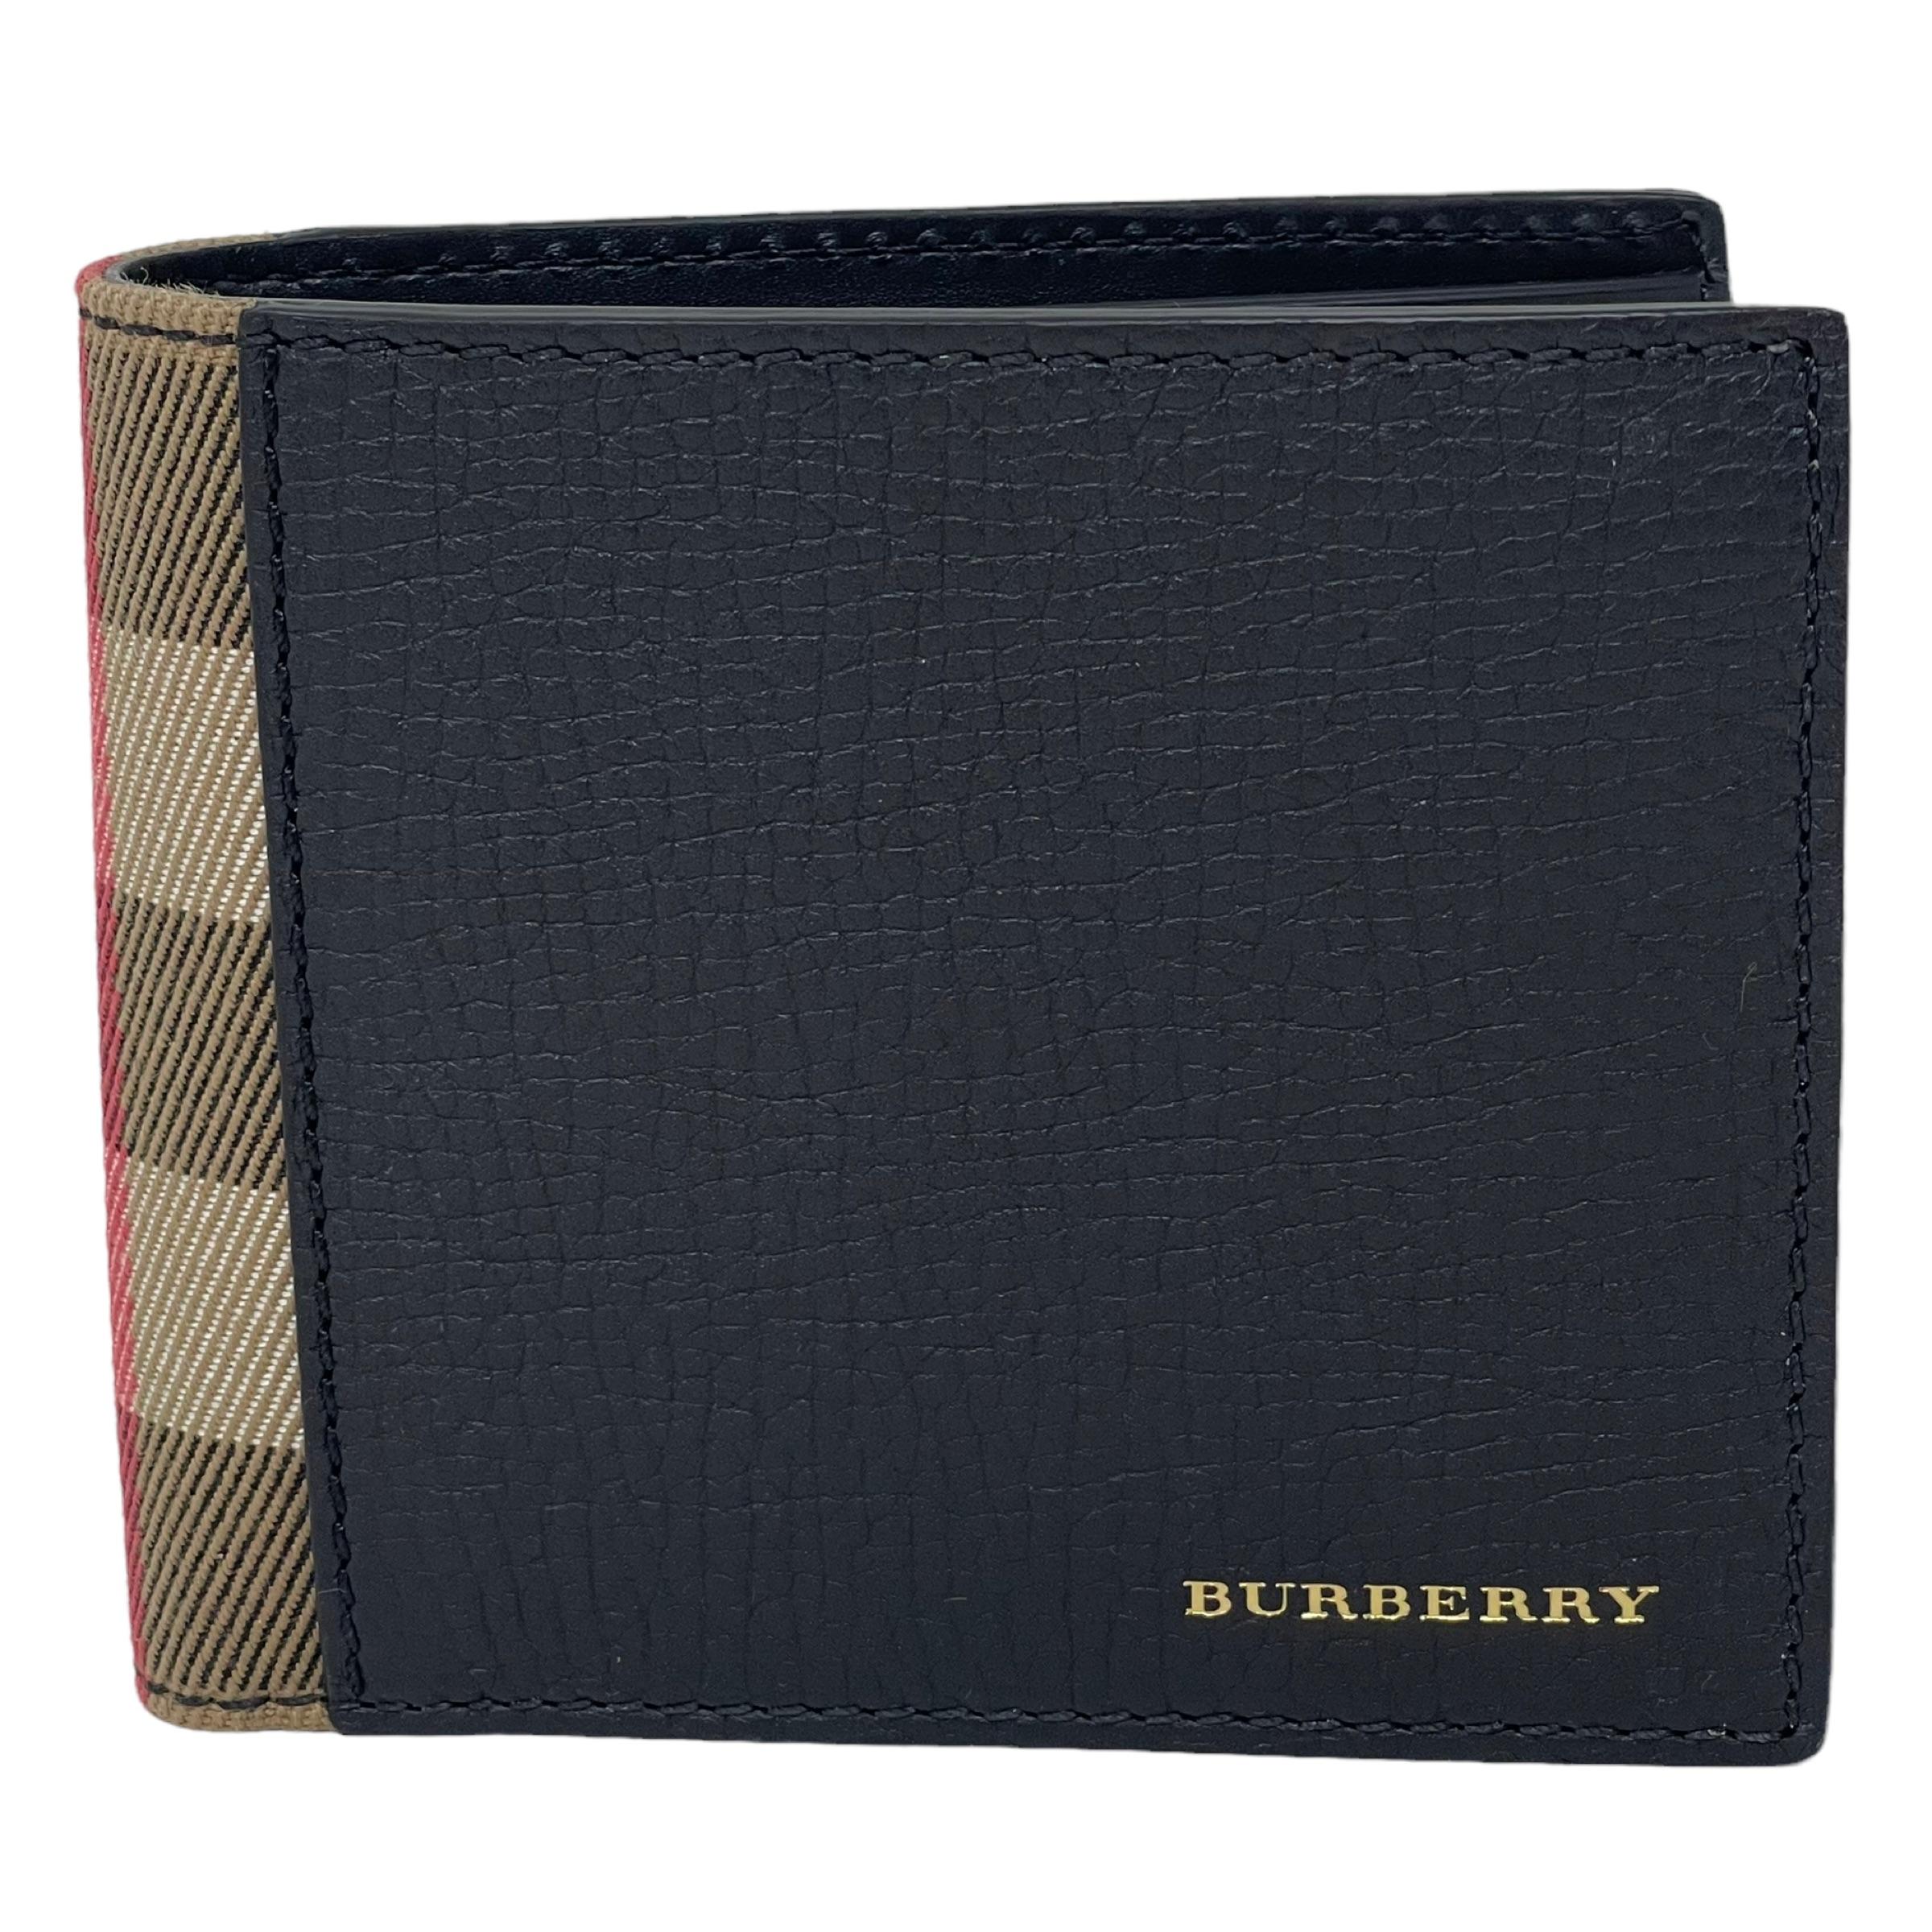 New Burberry Black Tartan House Check Leather Bifold Wallet

Authenticity Guaranteed

DETAILS
Brand: Burberry
Condition: Brand new
Gender: Men
Category: Wallet
Color: Black
Material: Leather
Tartan check pattern
2 bill compartments
2 slip pockets
8